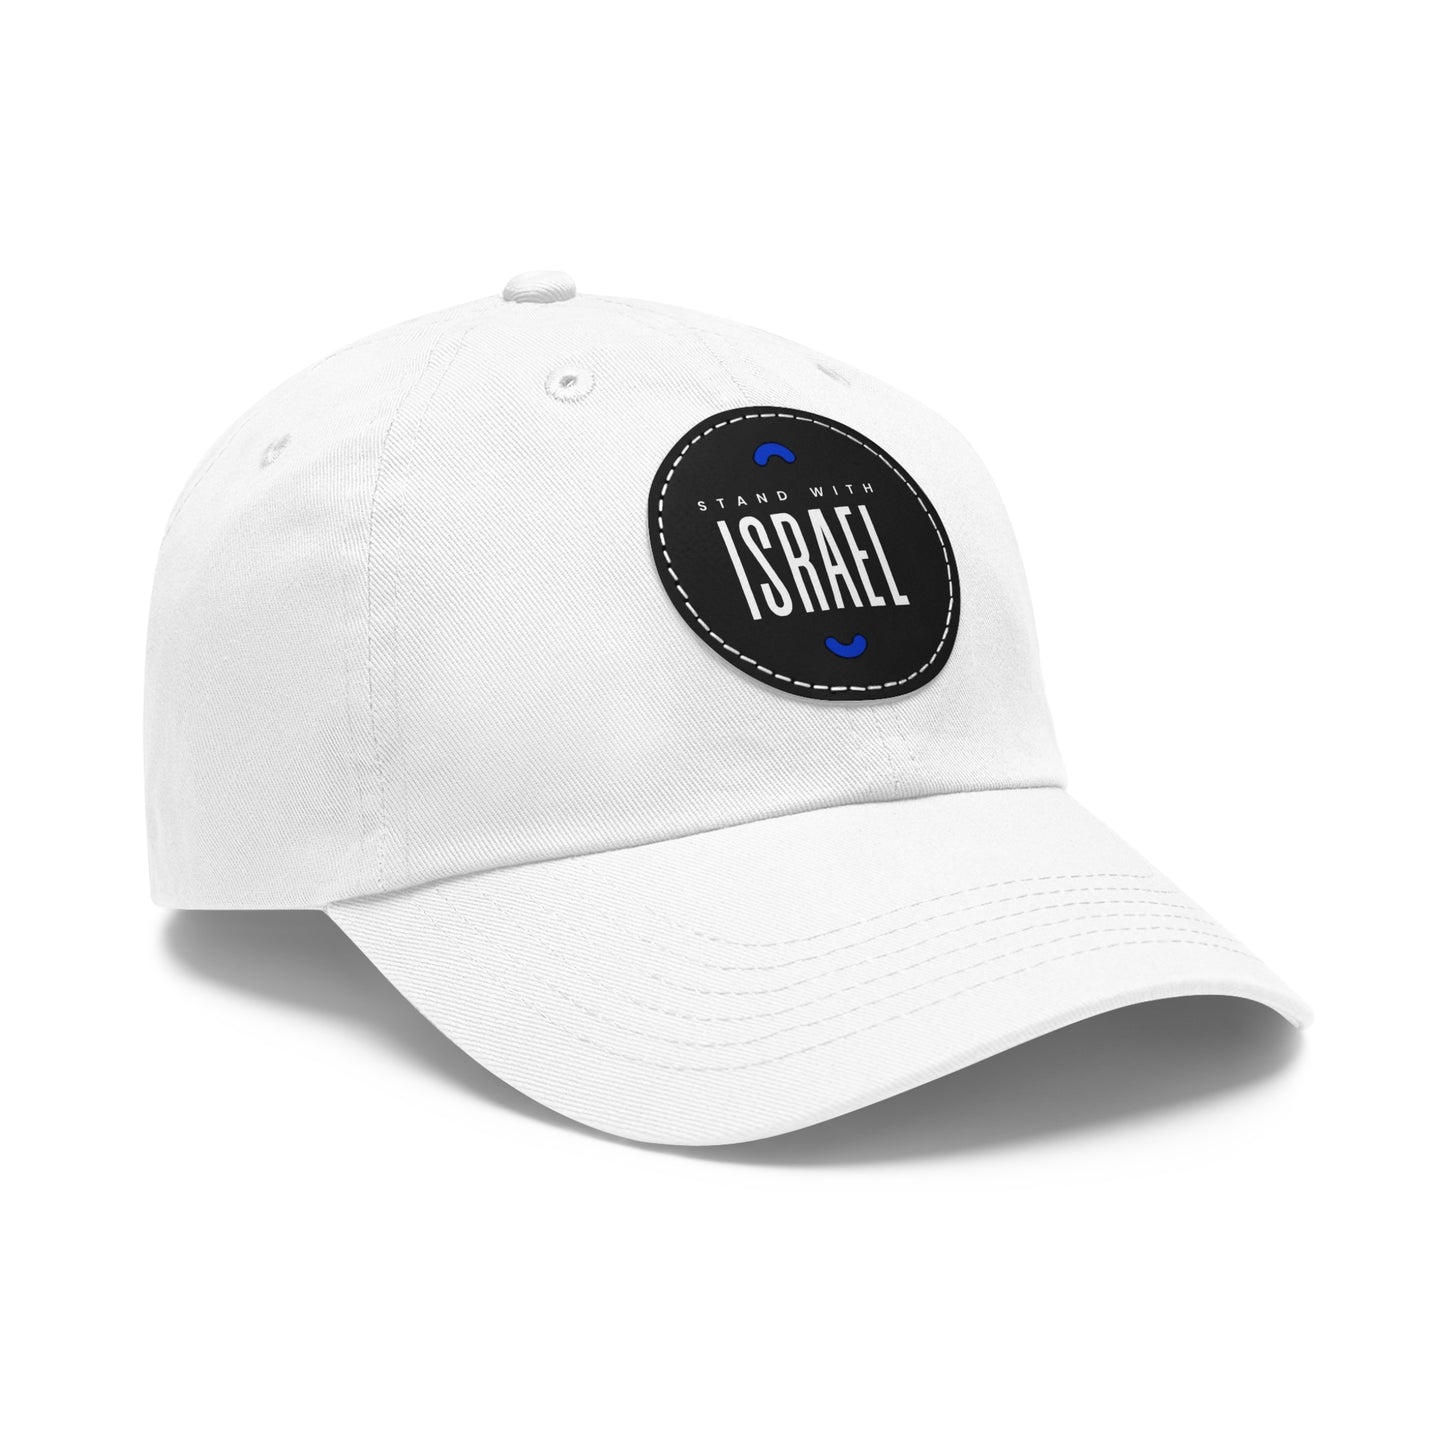 I Stand With Israel #2 Cap- with Leather Patch (Round)